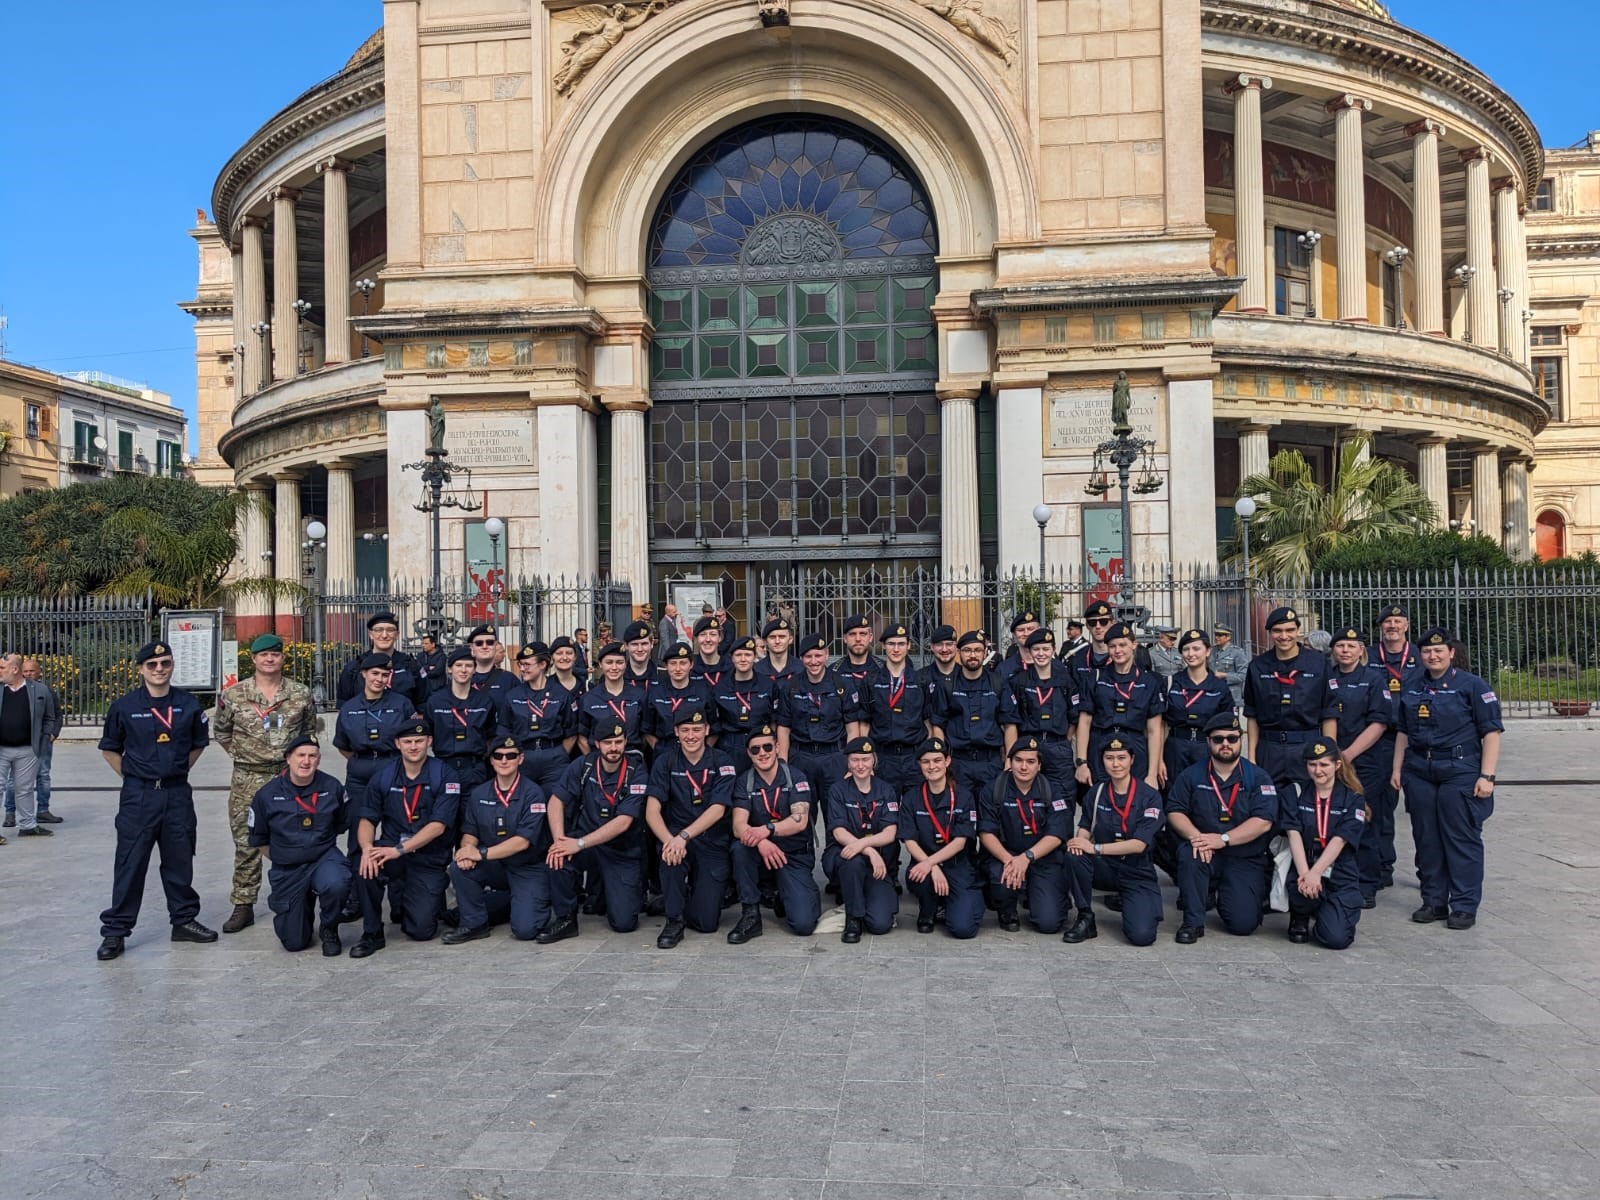 Group of Officer Cadets outside a building in Palermo, Sicily.